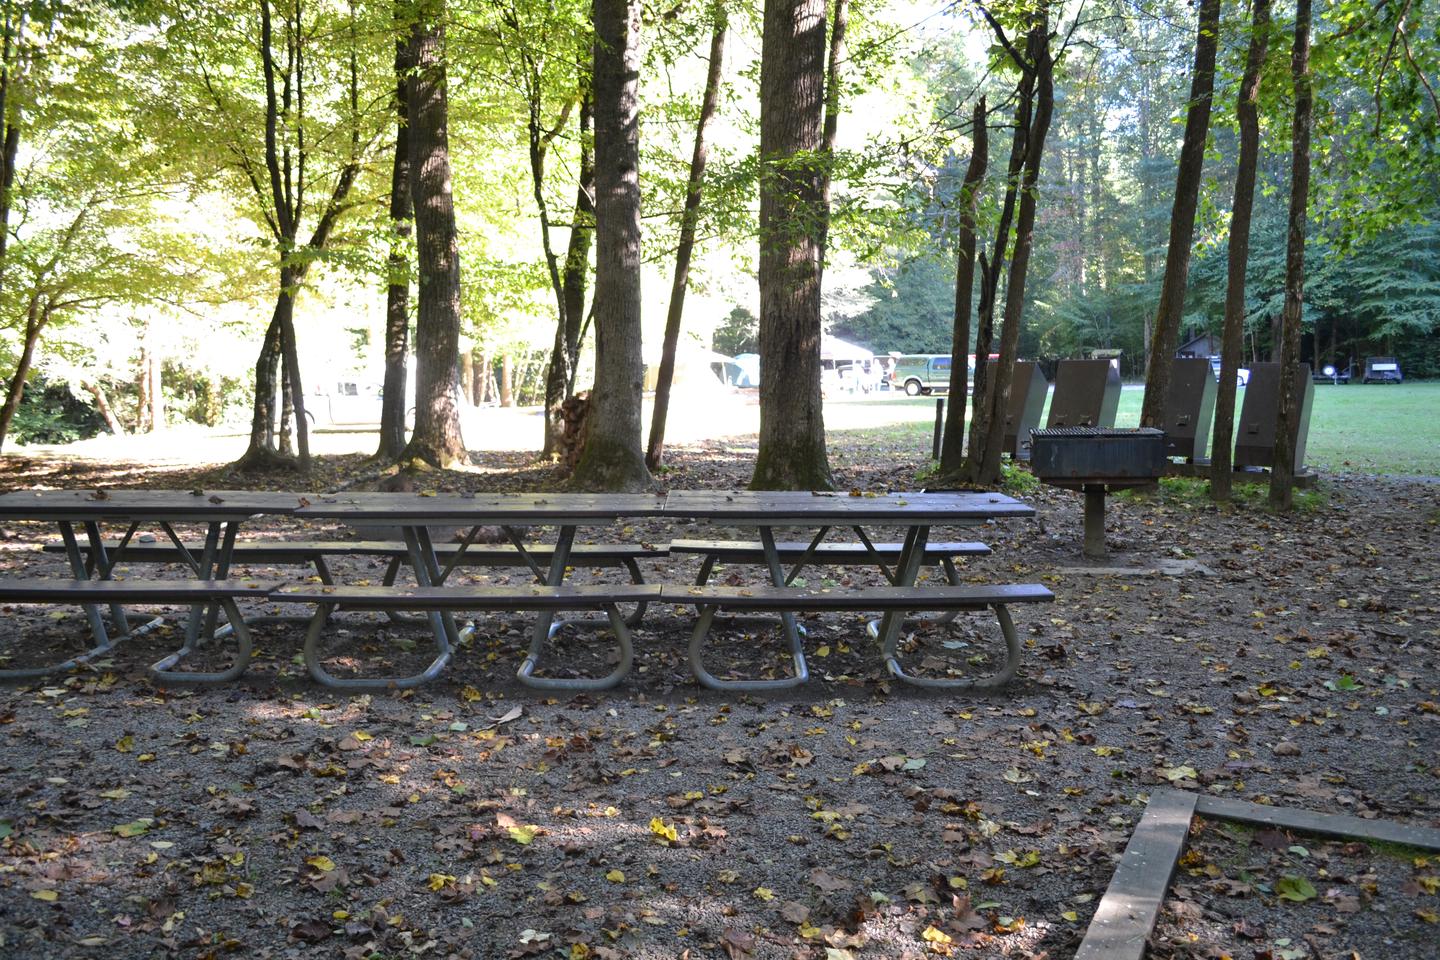 Group Site 2View of picnic tables from tent pad area with Group Site 1 shown in the foreground.  